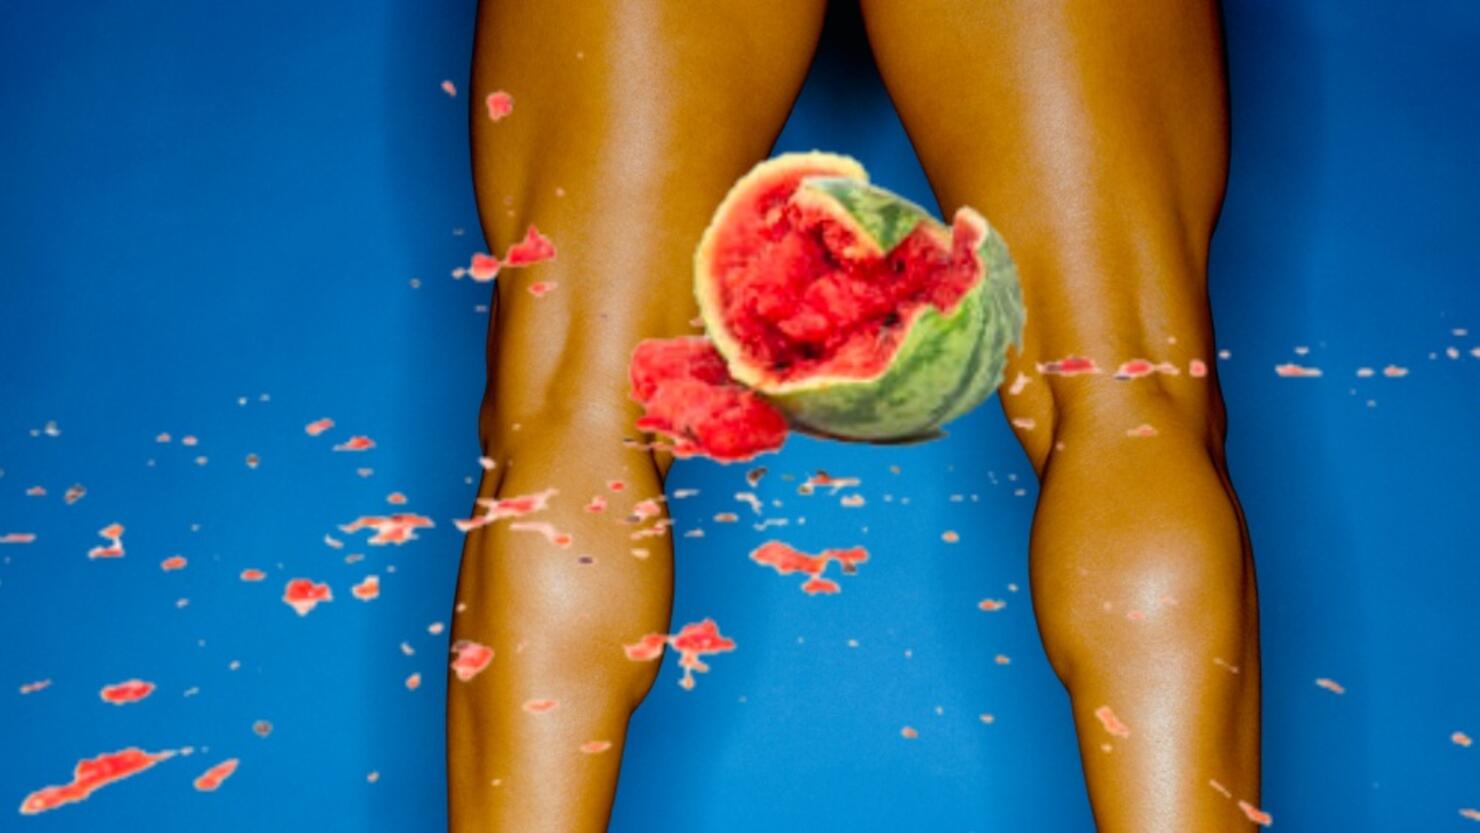 VIDEO: Las Vegas Woman Sets Record For Crushing Watermelons With Her Legs